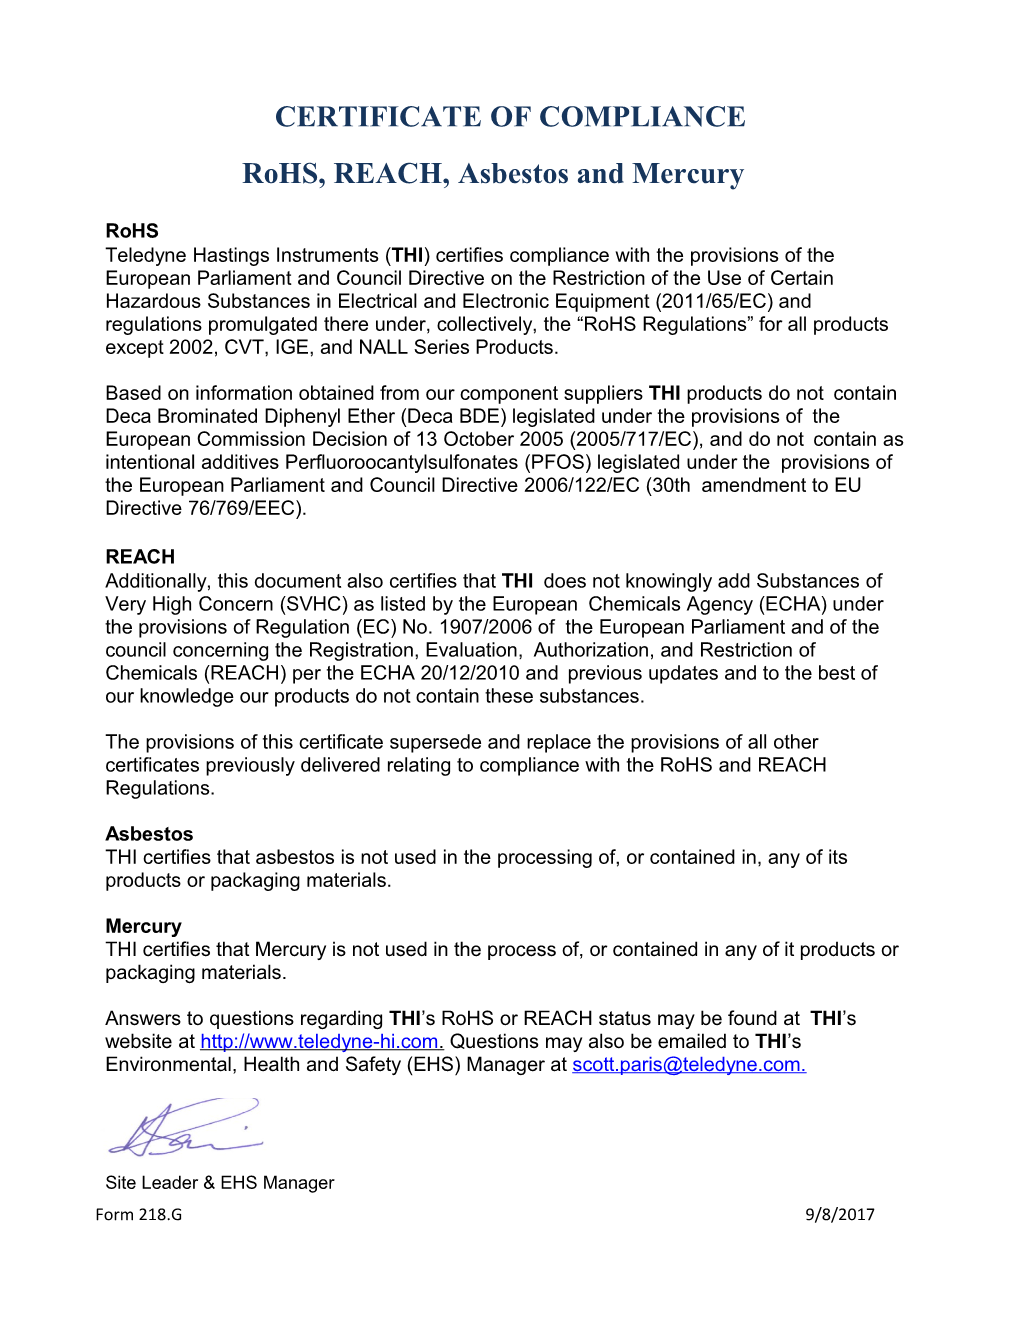 Rohs and REACH Certificate of Compliance Form 218 Rev B